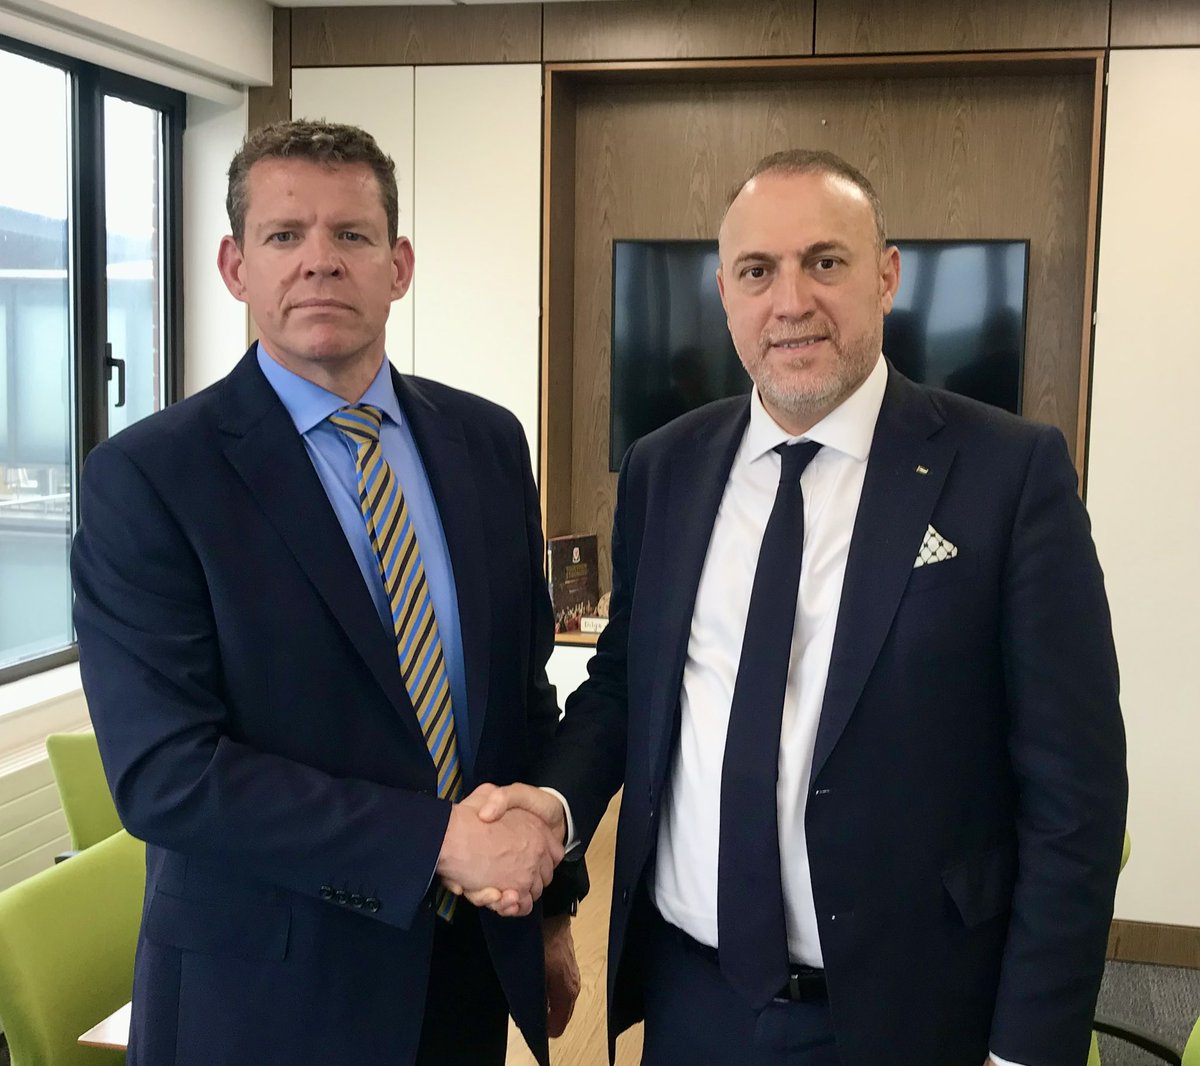 Plaid Cymru has been calling for an immediate ceasefire in Gaza and Israel since last October. I’m thankful for the opportunity to meet Ambassador Zomlot, Head of the Palestinian Mission to the United Kingdom, 1/4